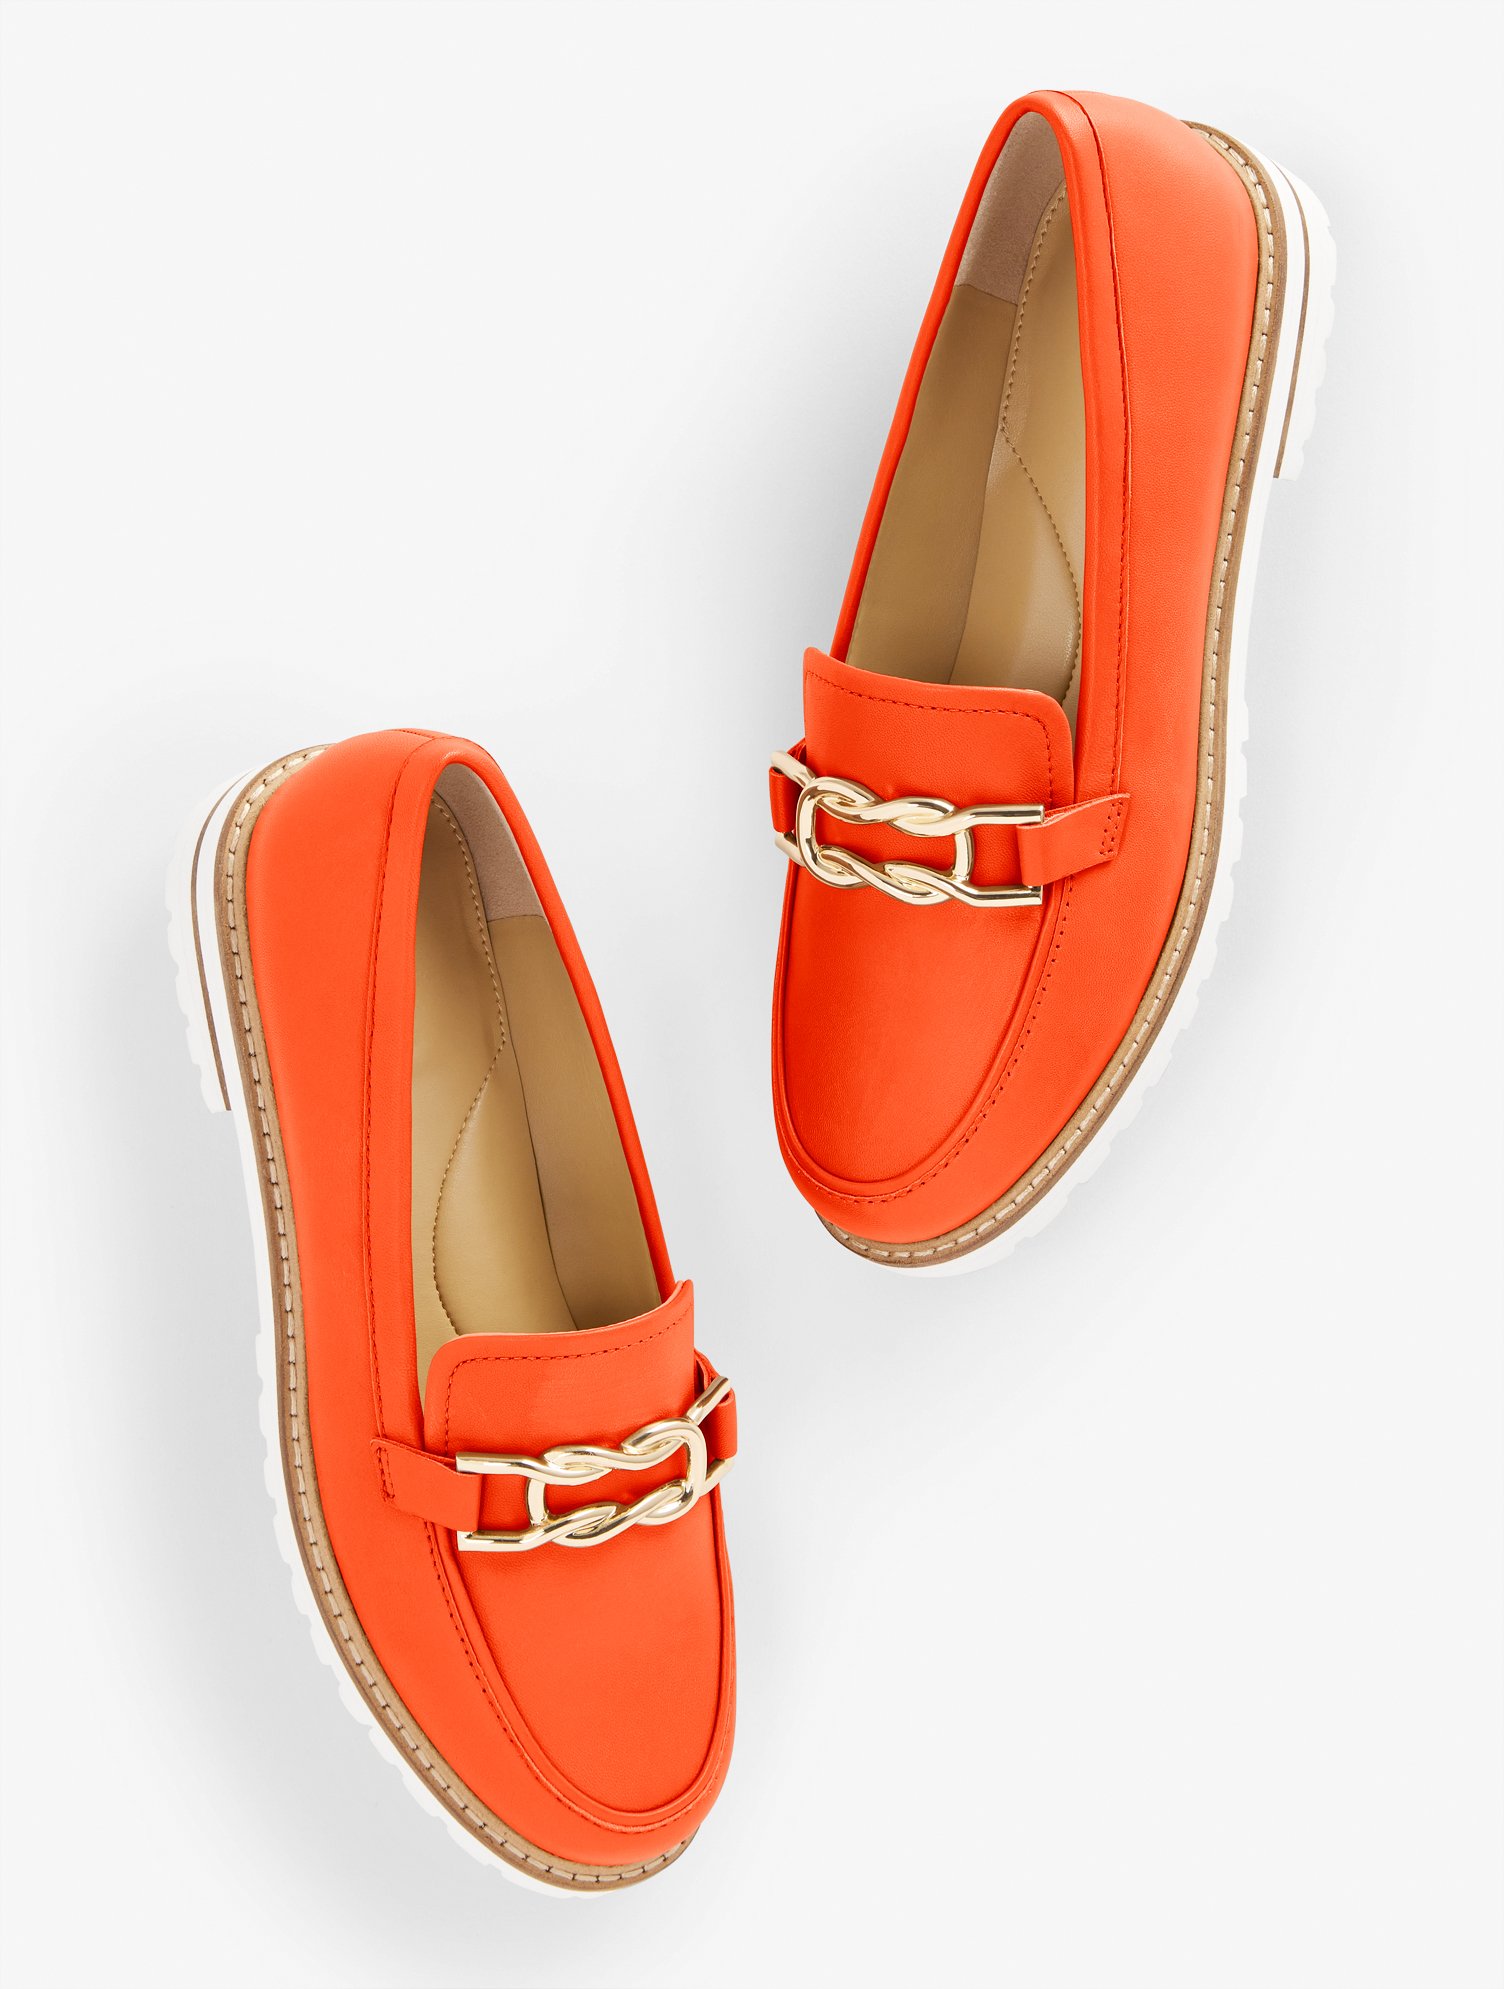 Talbots Laura Link Nappa Loafers - Bright Tangerine - 11m